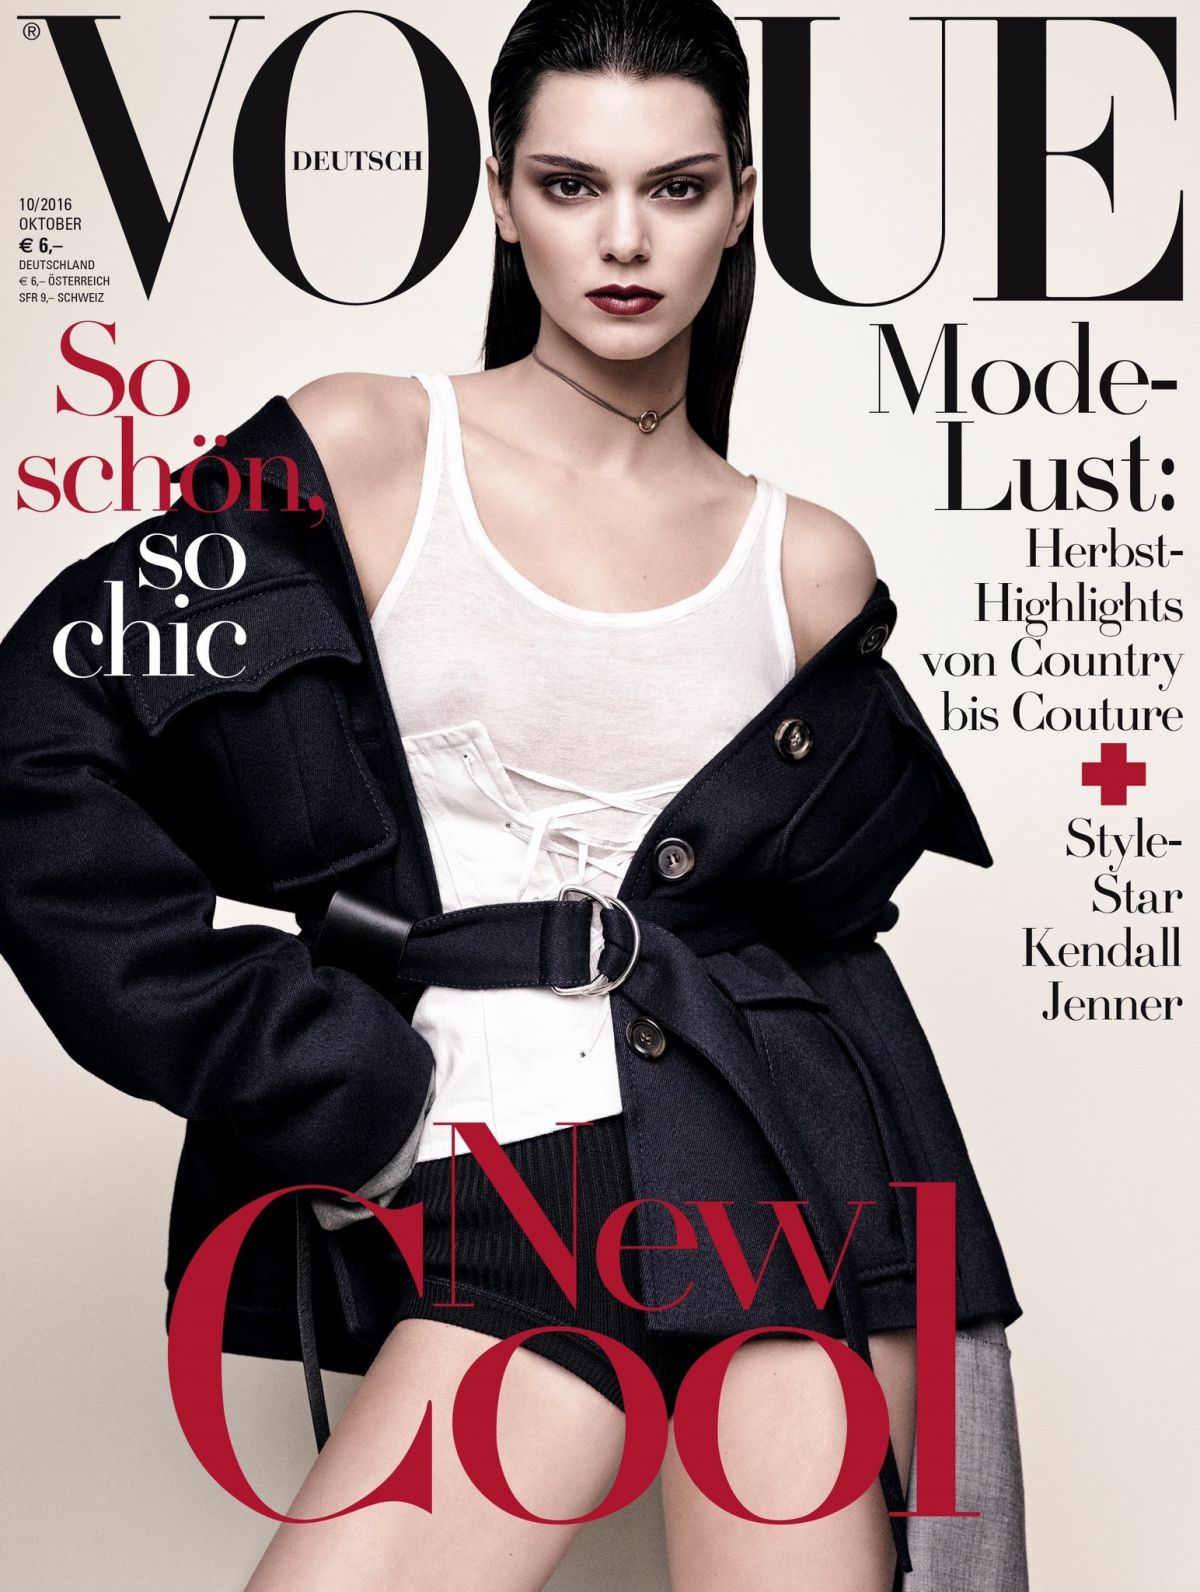 KENDALL JENNER in Vogue Magazine, Germany Octobre 2016 Issue - HawtCelebs